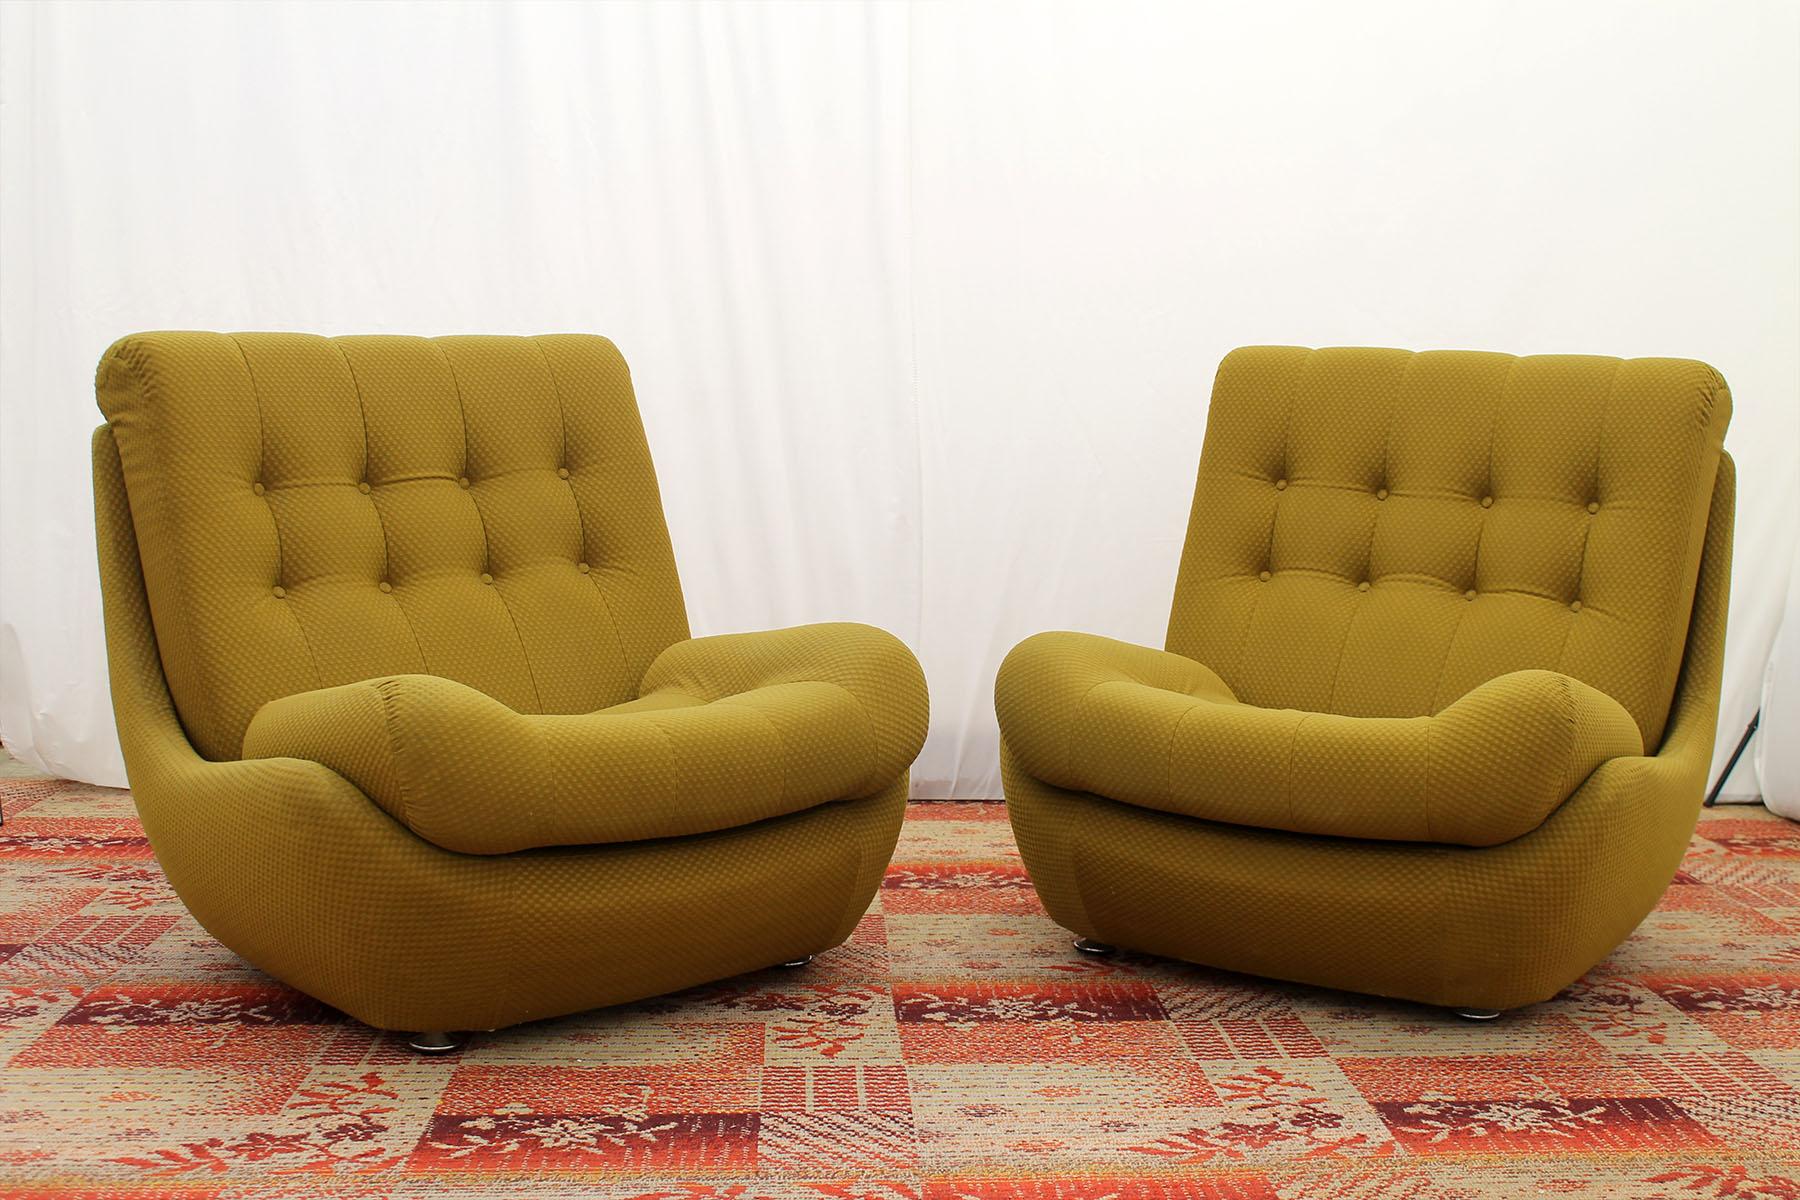 This living room set is a typical example of furniture design of the 1970/1980s in the former Czechoslovakia. It was made by JITONA company in the 1970s.

This living set was one of the most sought after in Czechoslovakia and was one of the few to